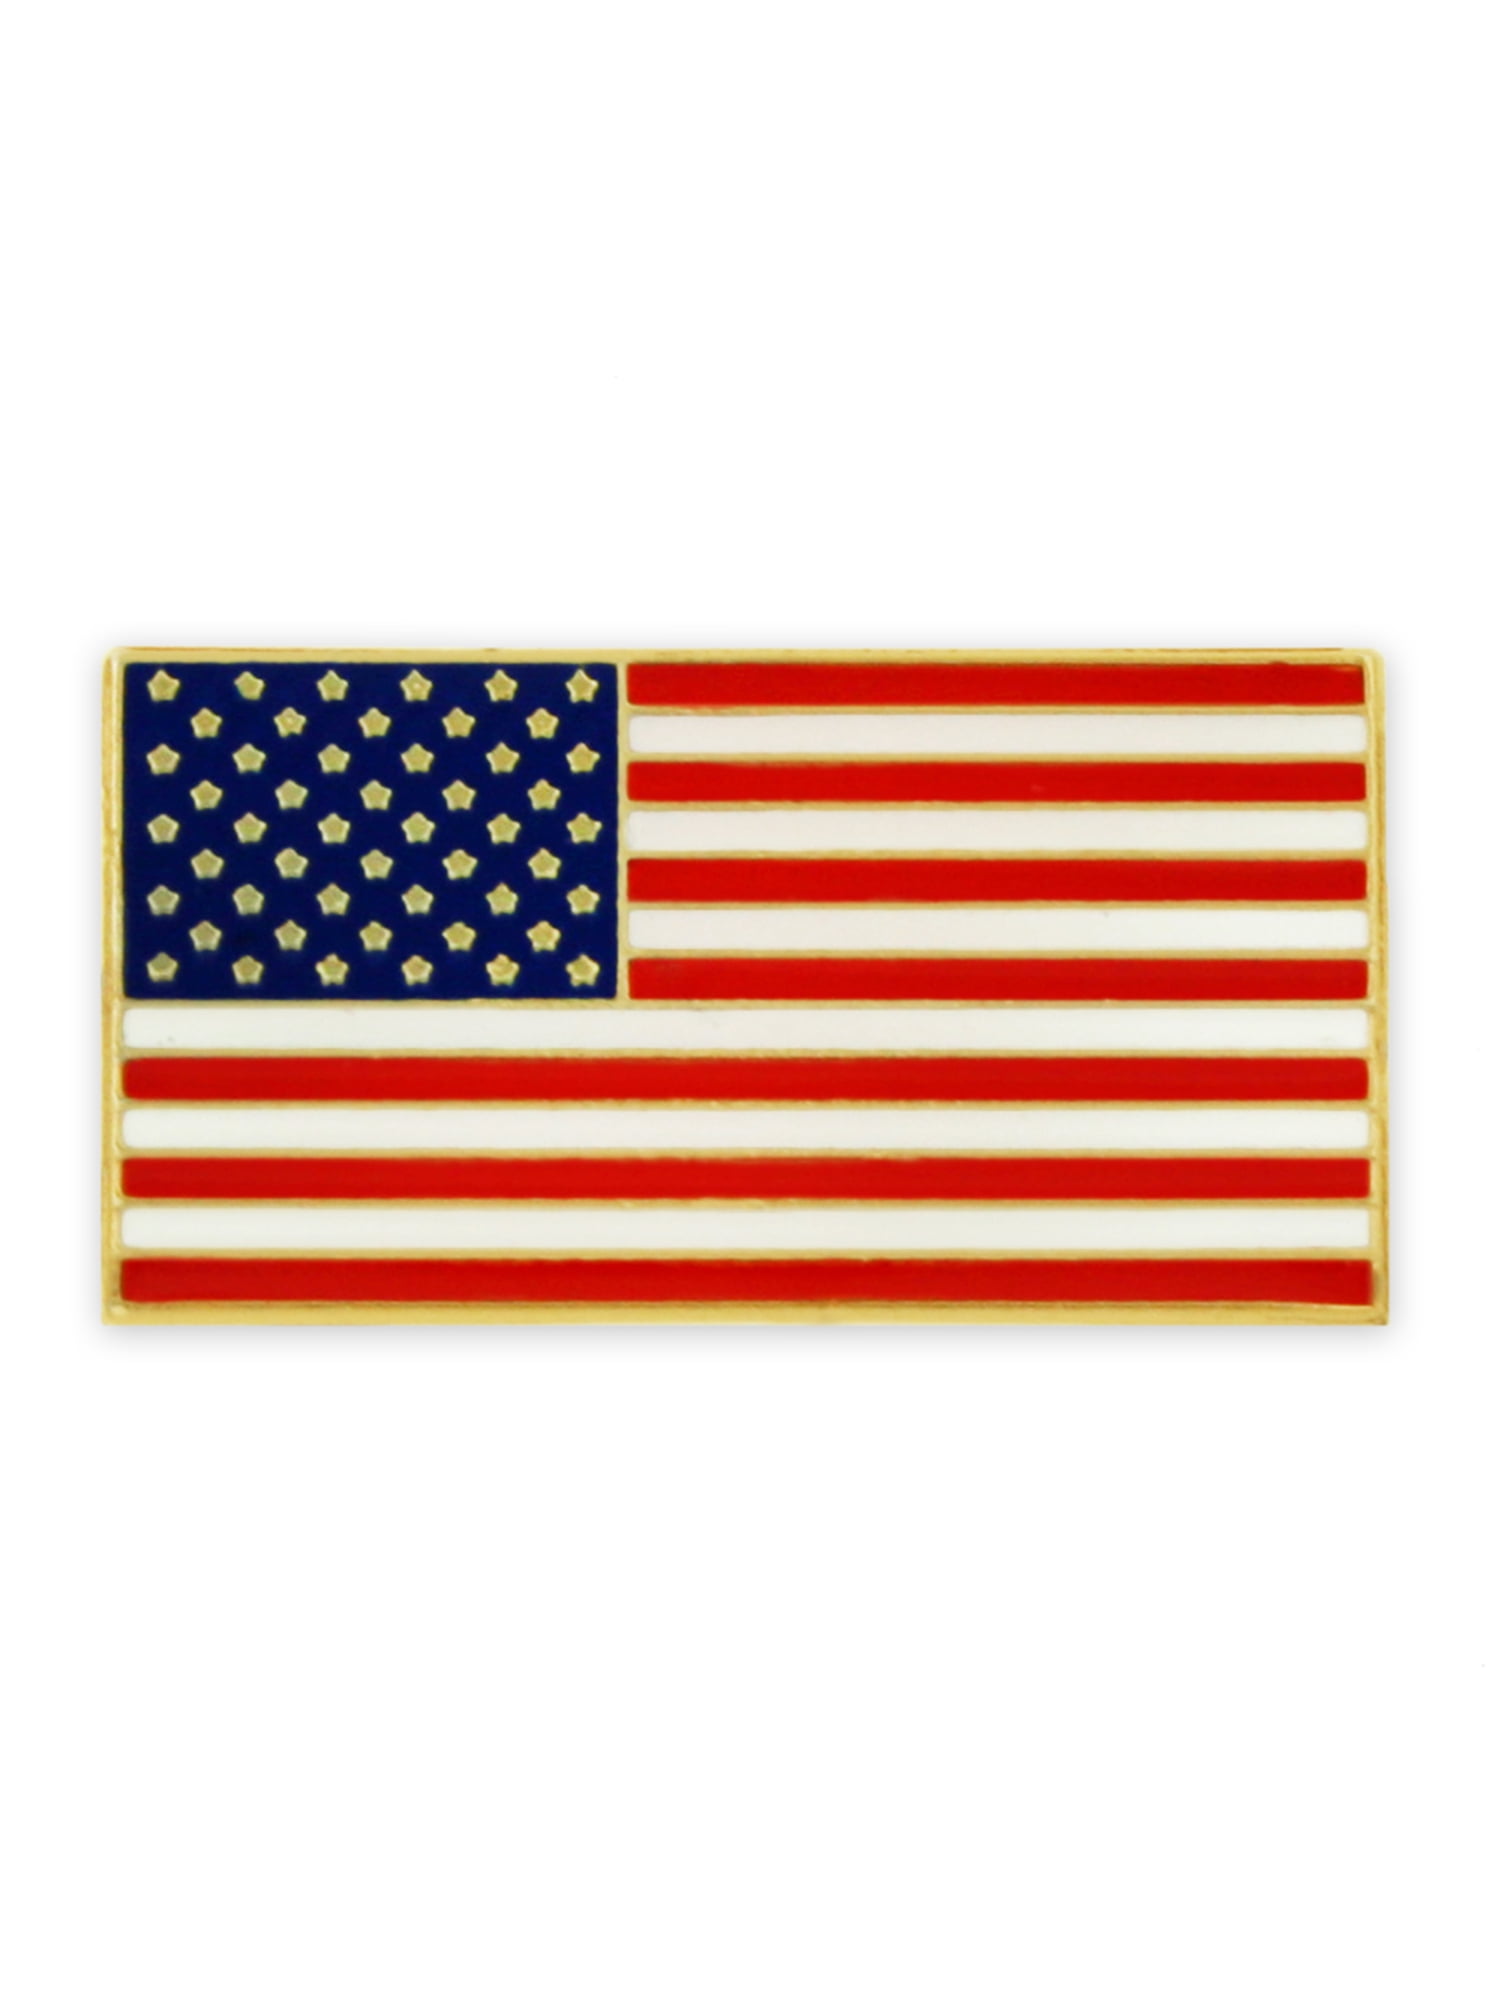 American Flag Lapel Pin Ships From USA! 